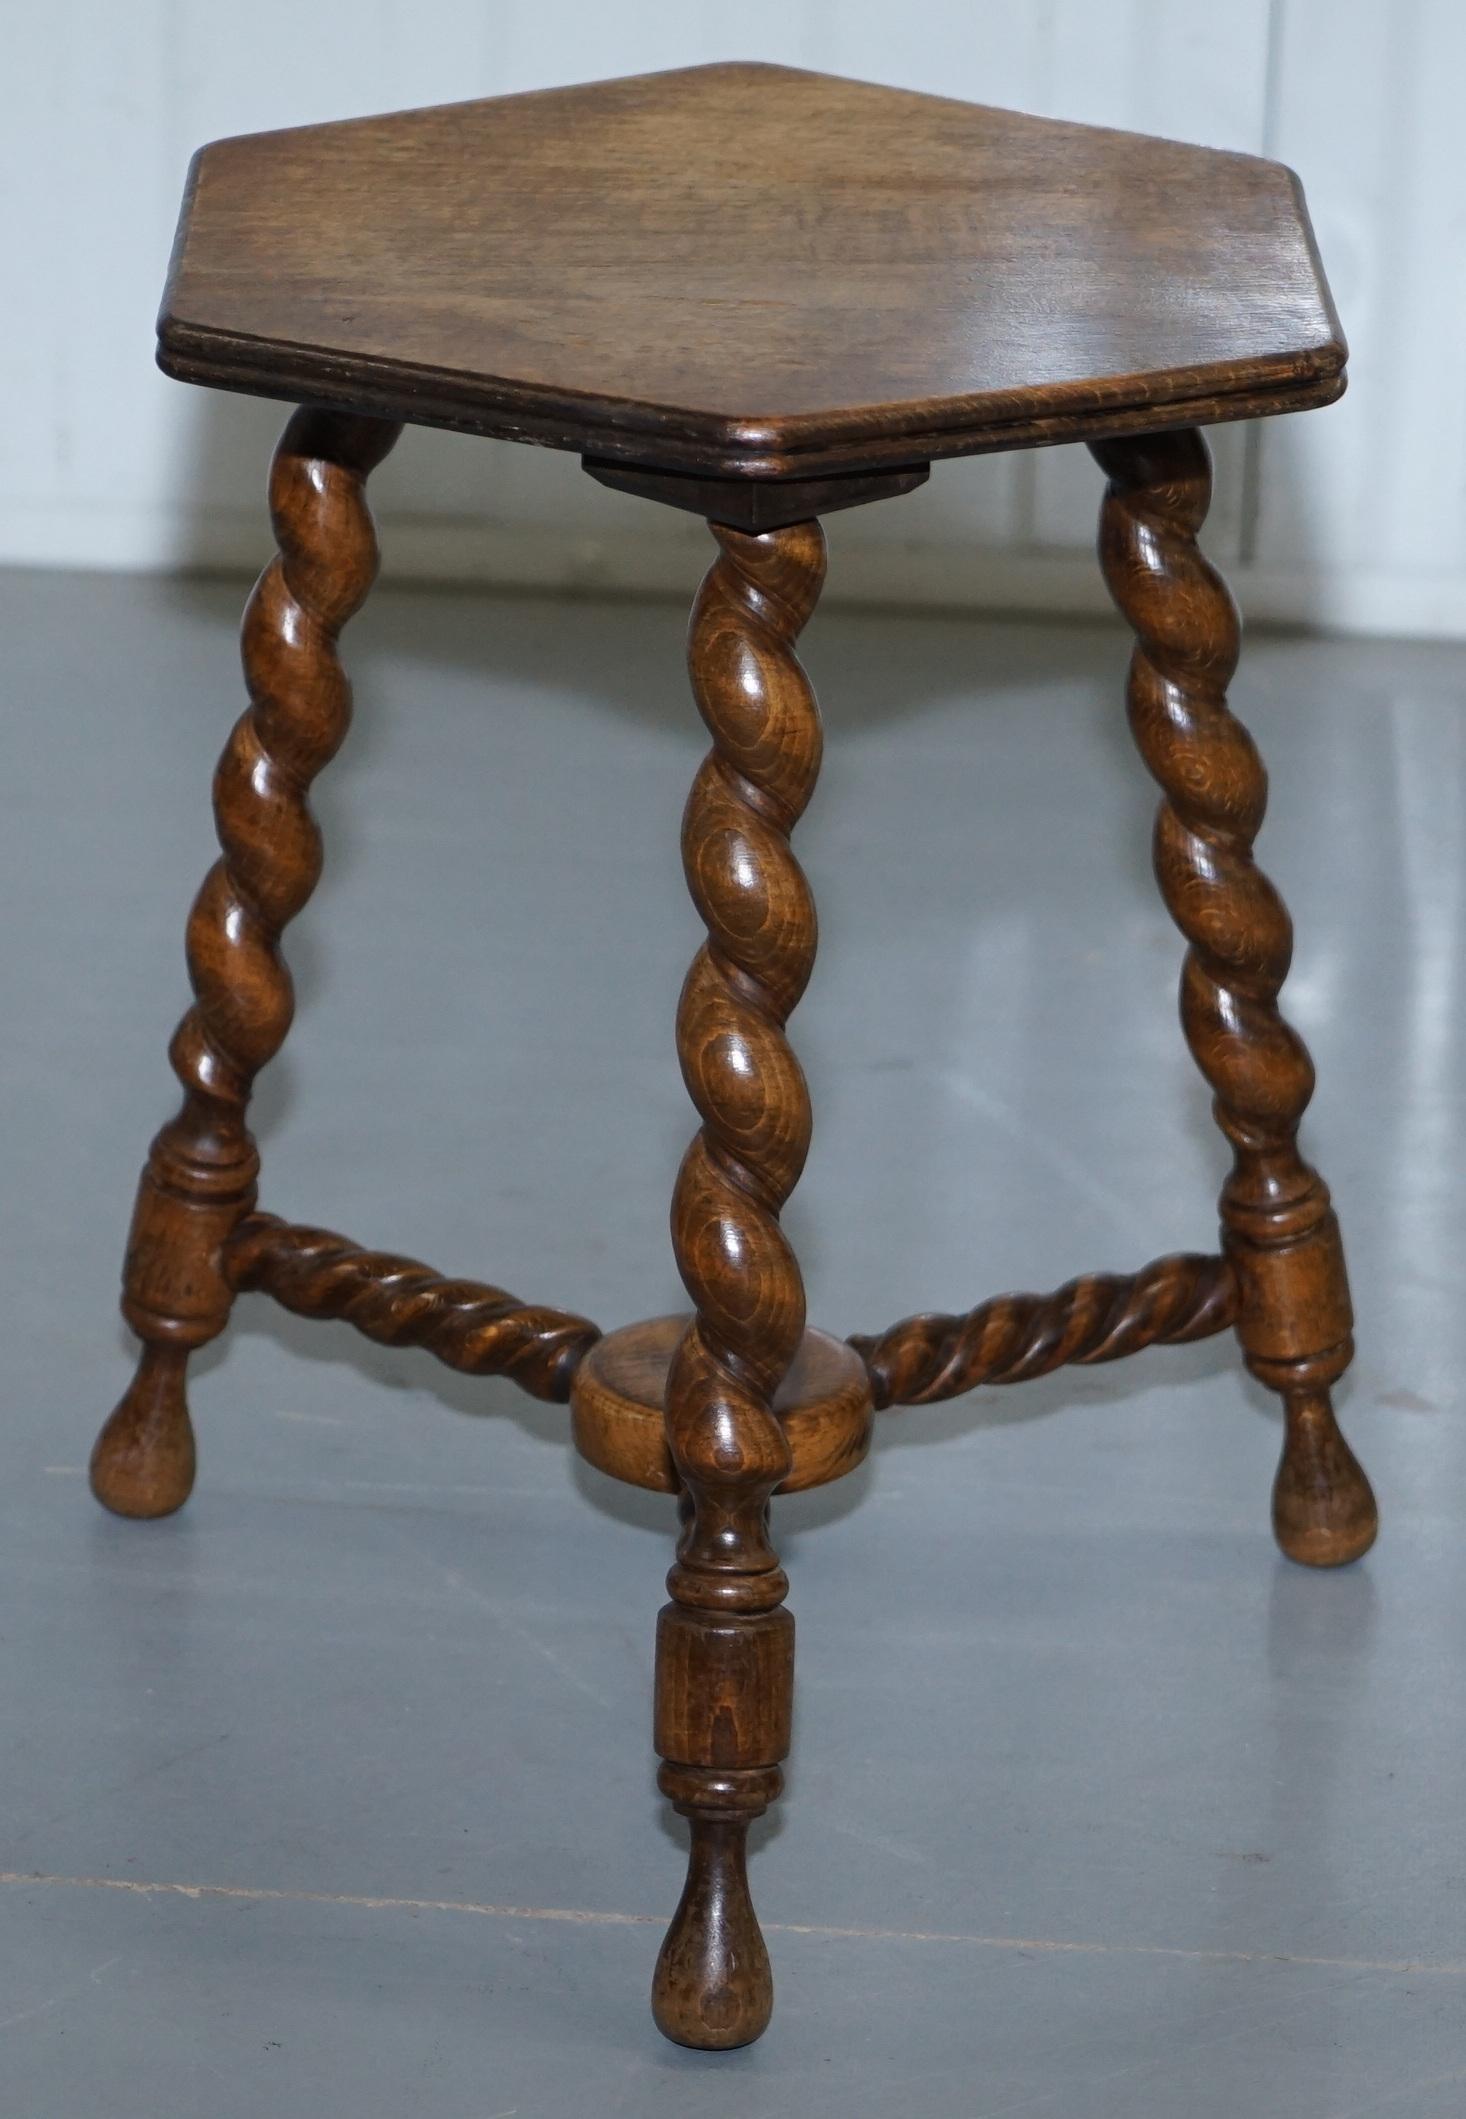 We are delighted to offer for sale this small very nice Edwardian English oak side, end, lamp, wine table with barley twist legs

A nice looking and well made piece, we have cleaned waxed and polished it from top to bottom

Dimensions:

Height